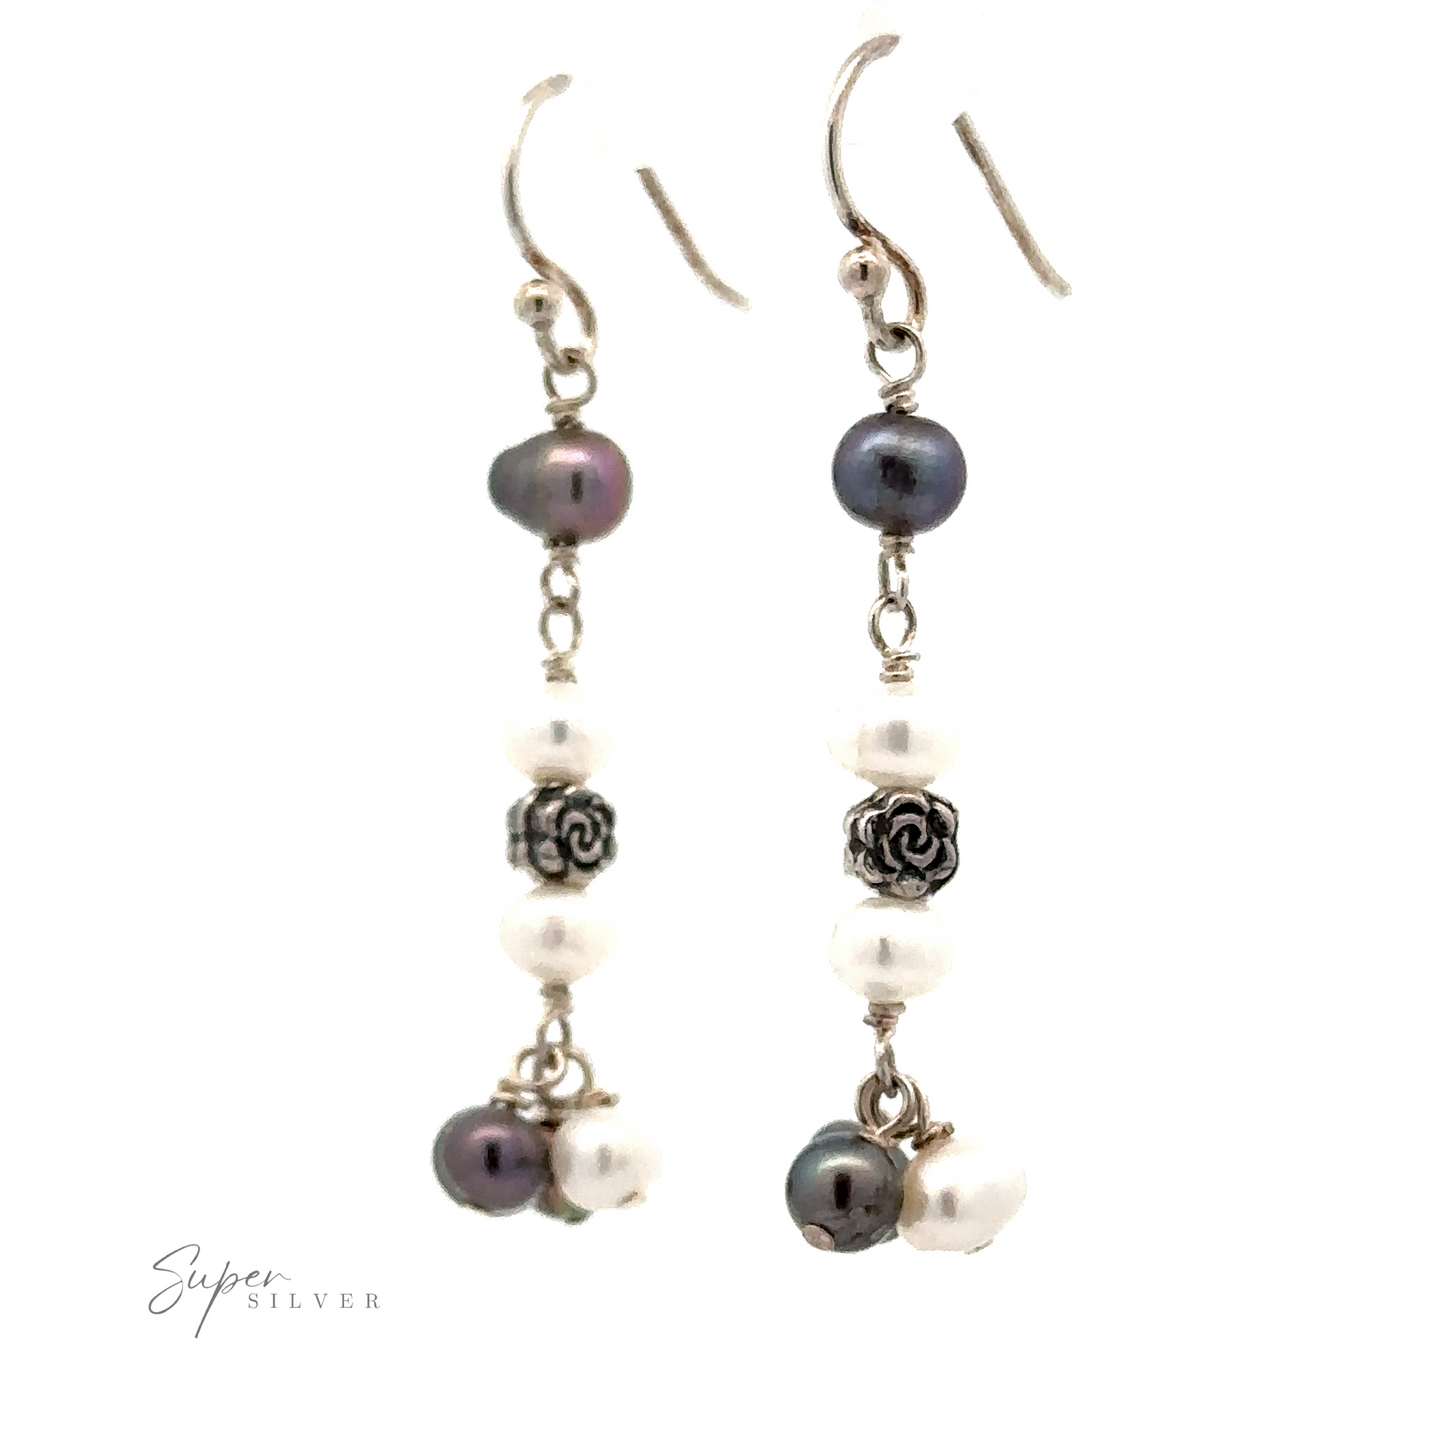 
                  
                    A pair of Floral Pearl Bead Earrings featuring alternating white and black pearls, interspersed with small silver decorative beads.
                  
                